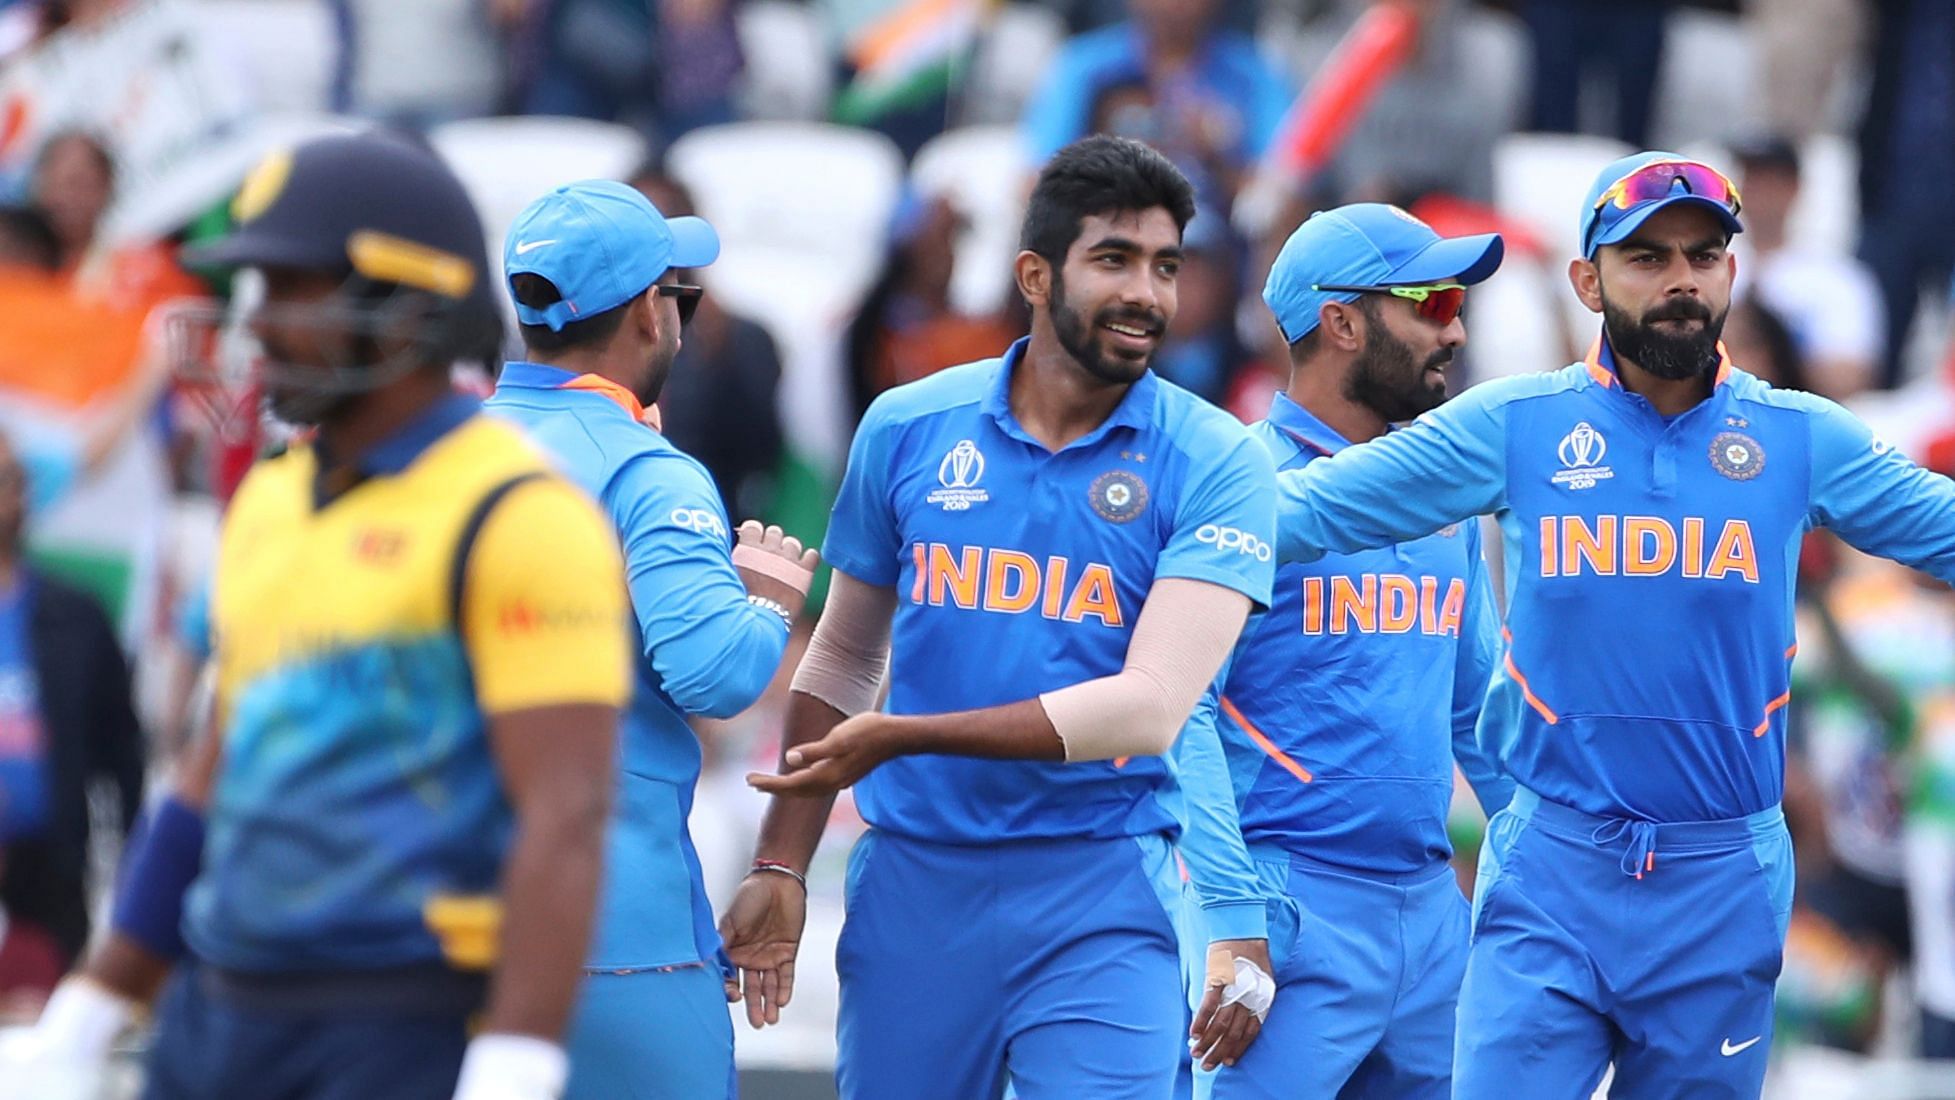 India thrashed Sri Lanka by seven wickets in their final group game of the ICC World Cup 2019.